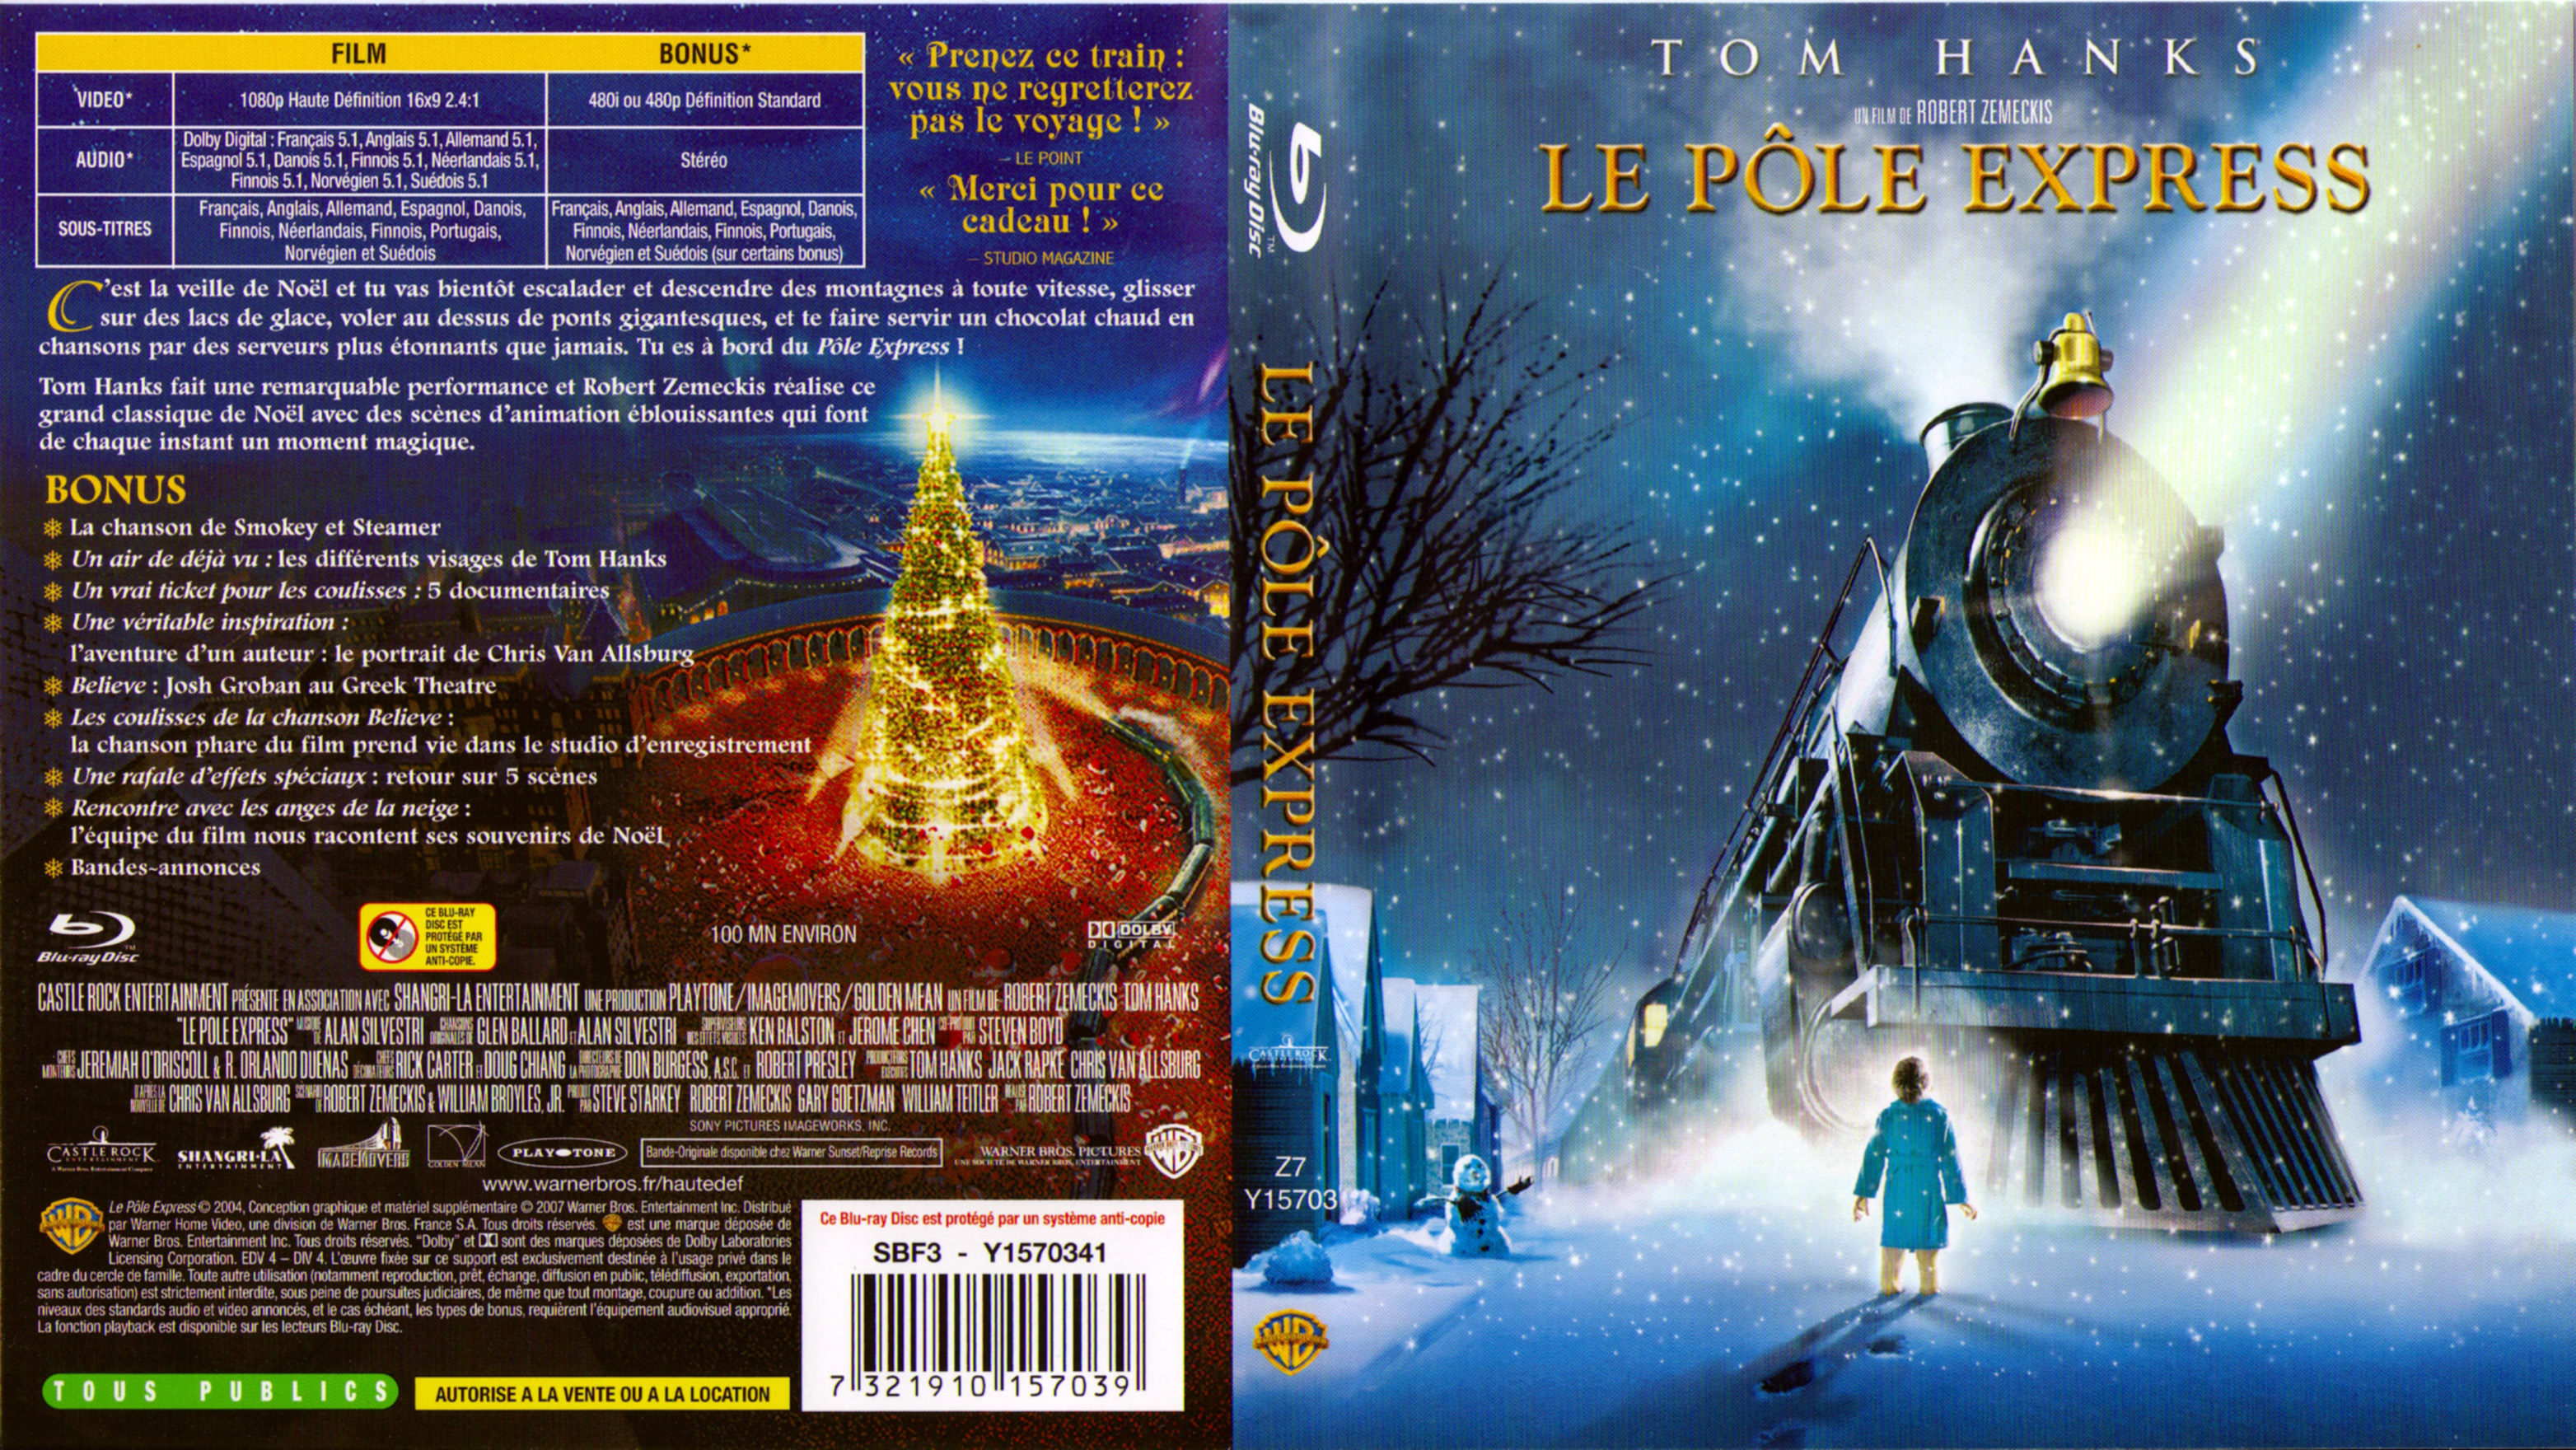 Jaquette DVD Le pole express (BLU-RAY)